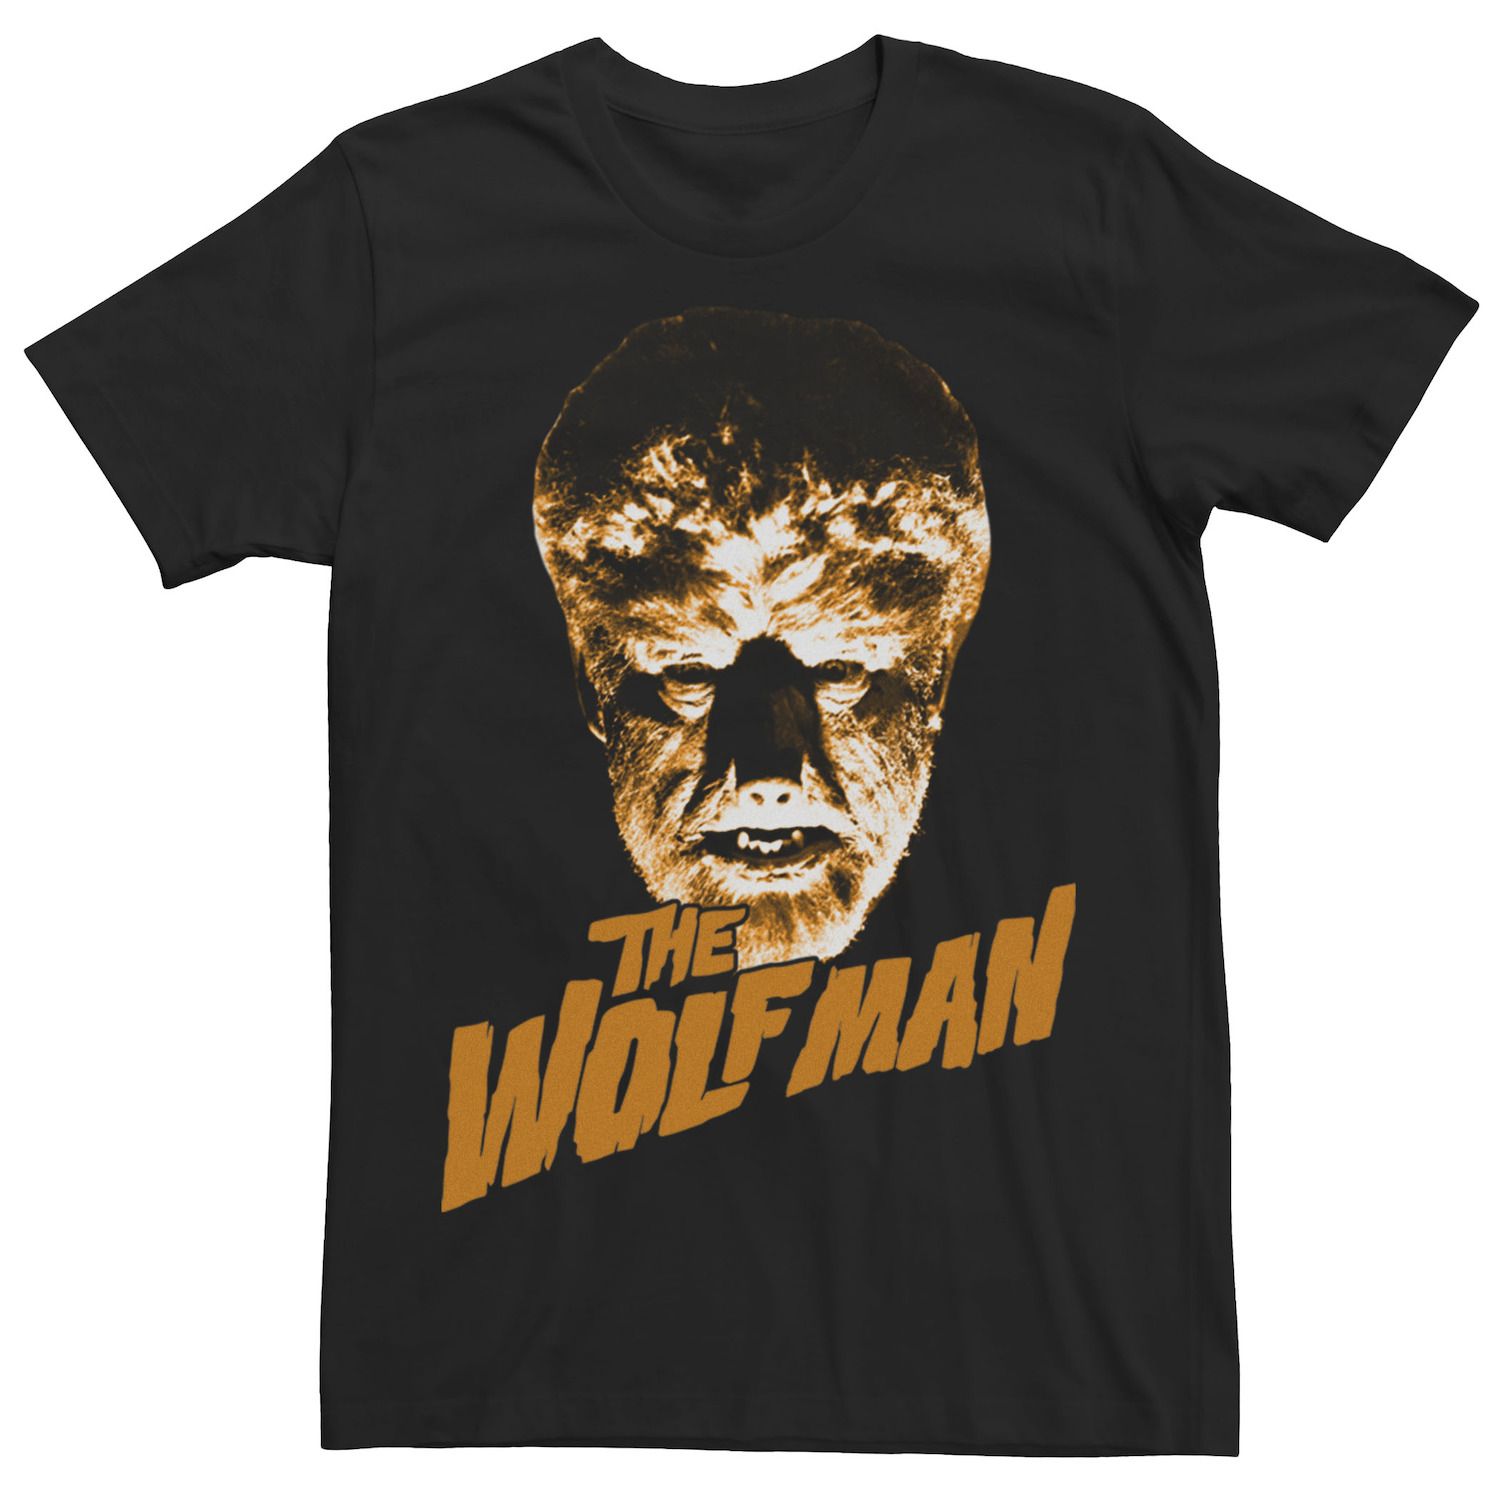 Image for Licensed Character Men's Universal Monsters The Wolfman Orange Hue Portrait Graphic Tee at Kohl's.